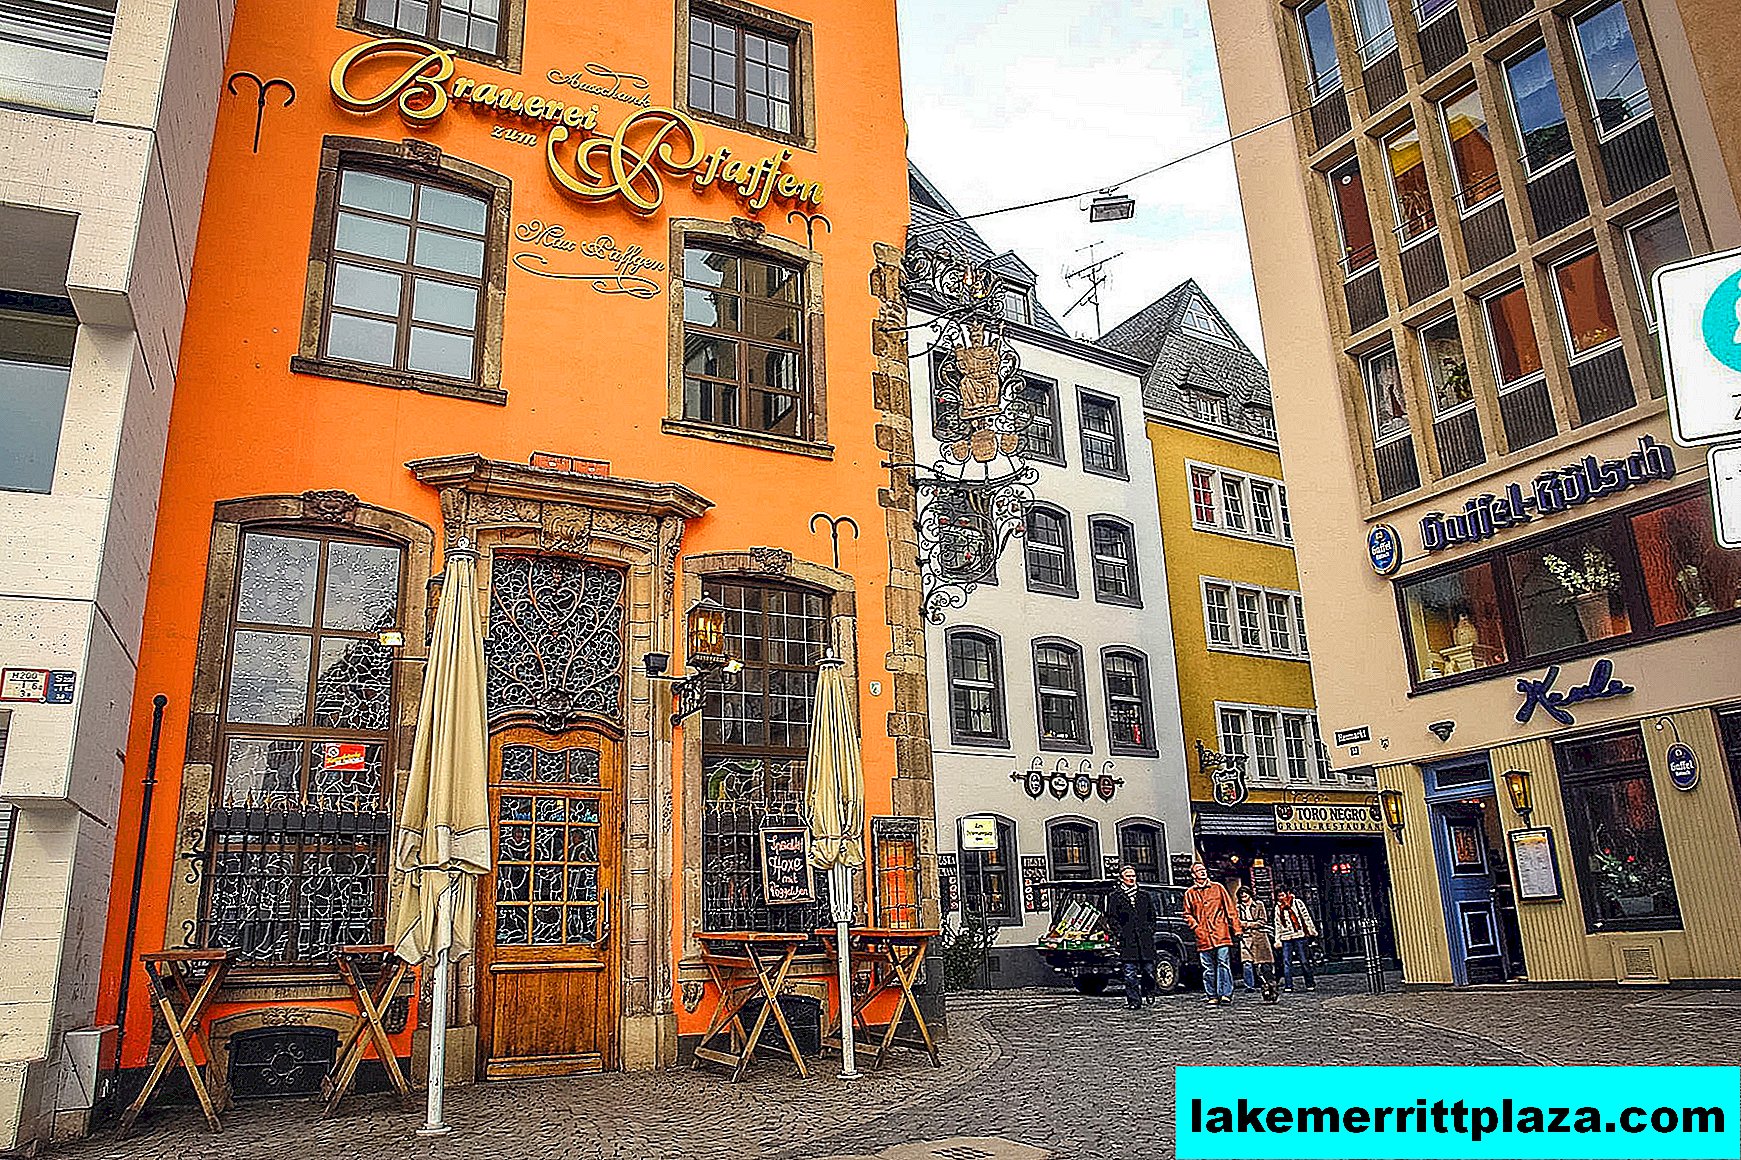 Beers and restaurants in the Old Town